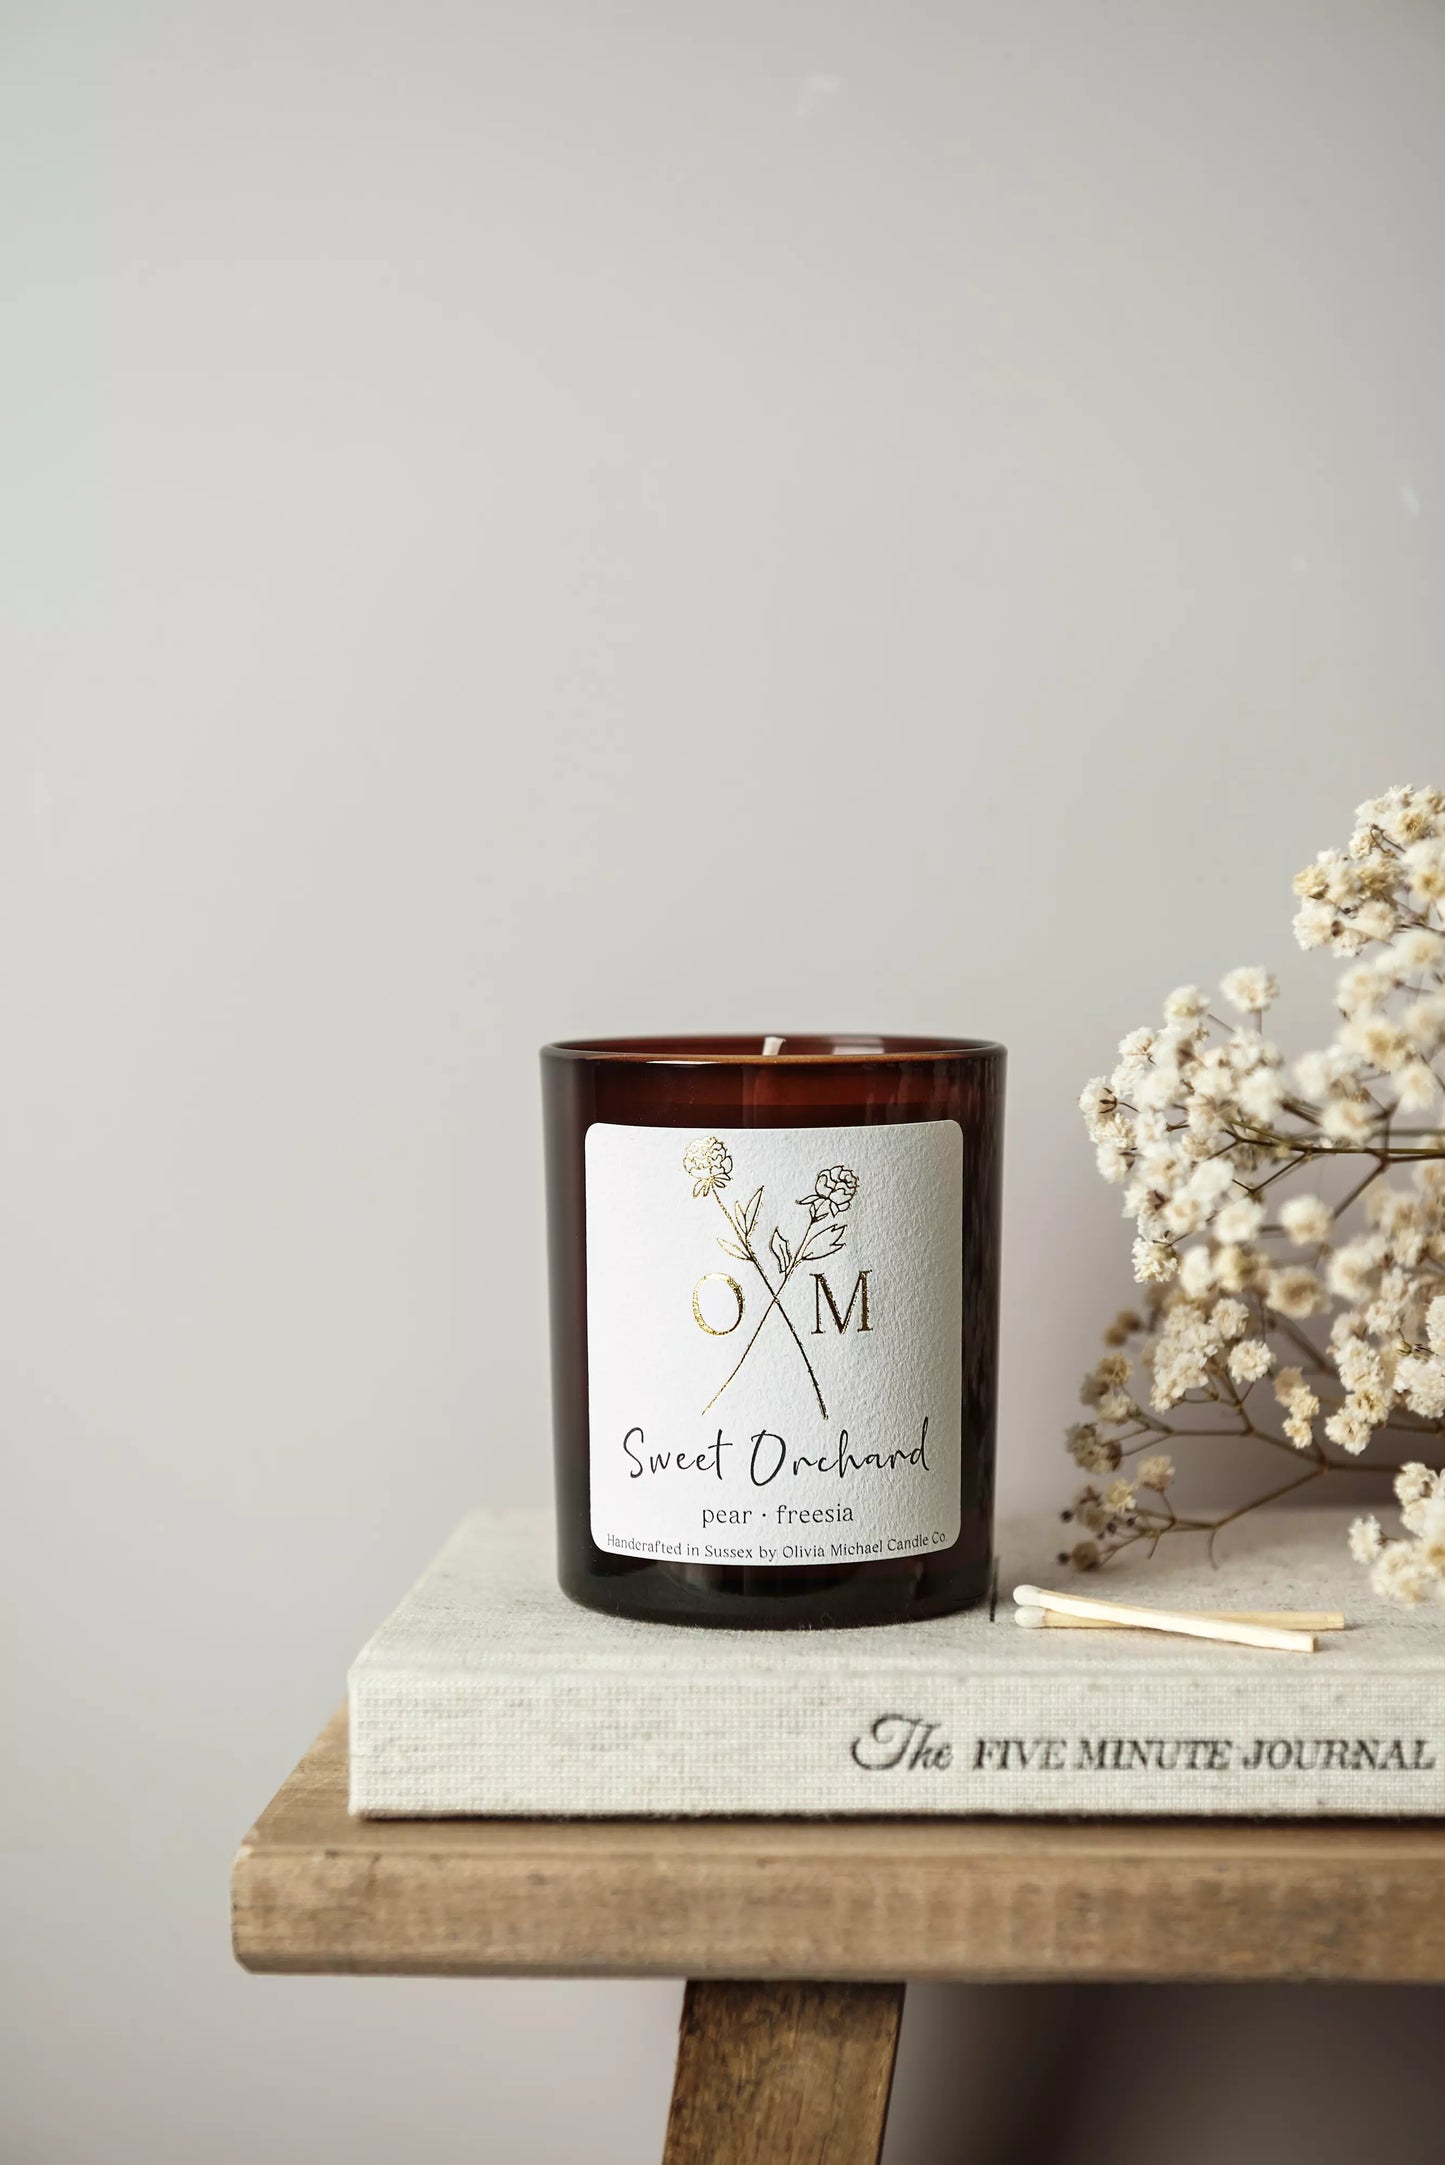 Our pear and freesia scented candle is on display in an amber glass jar.